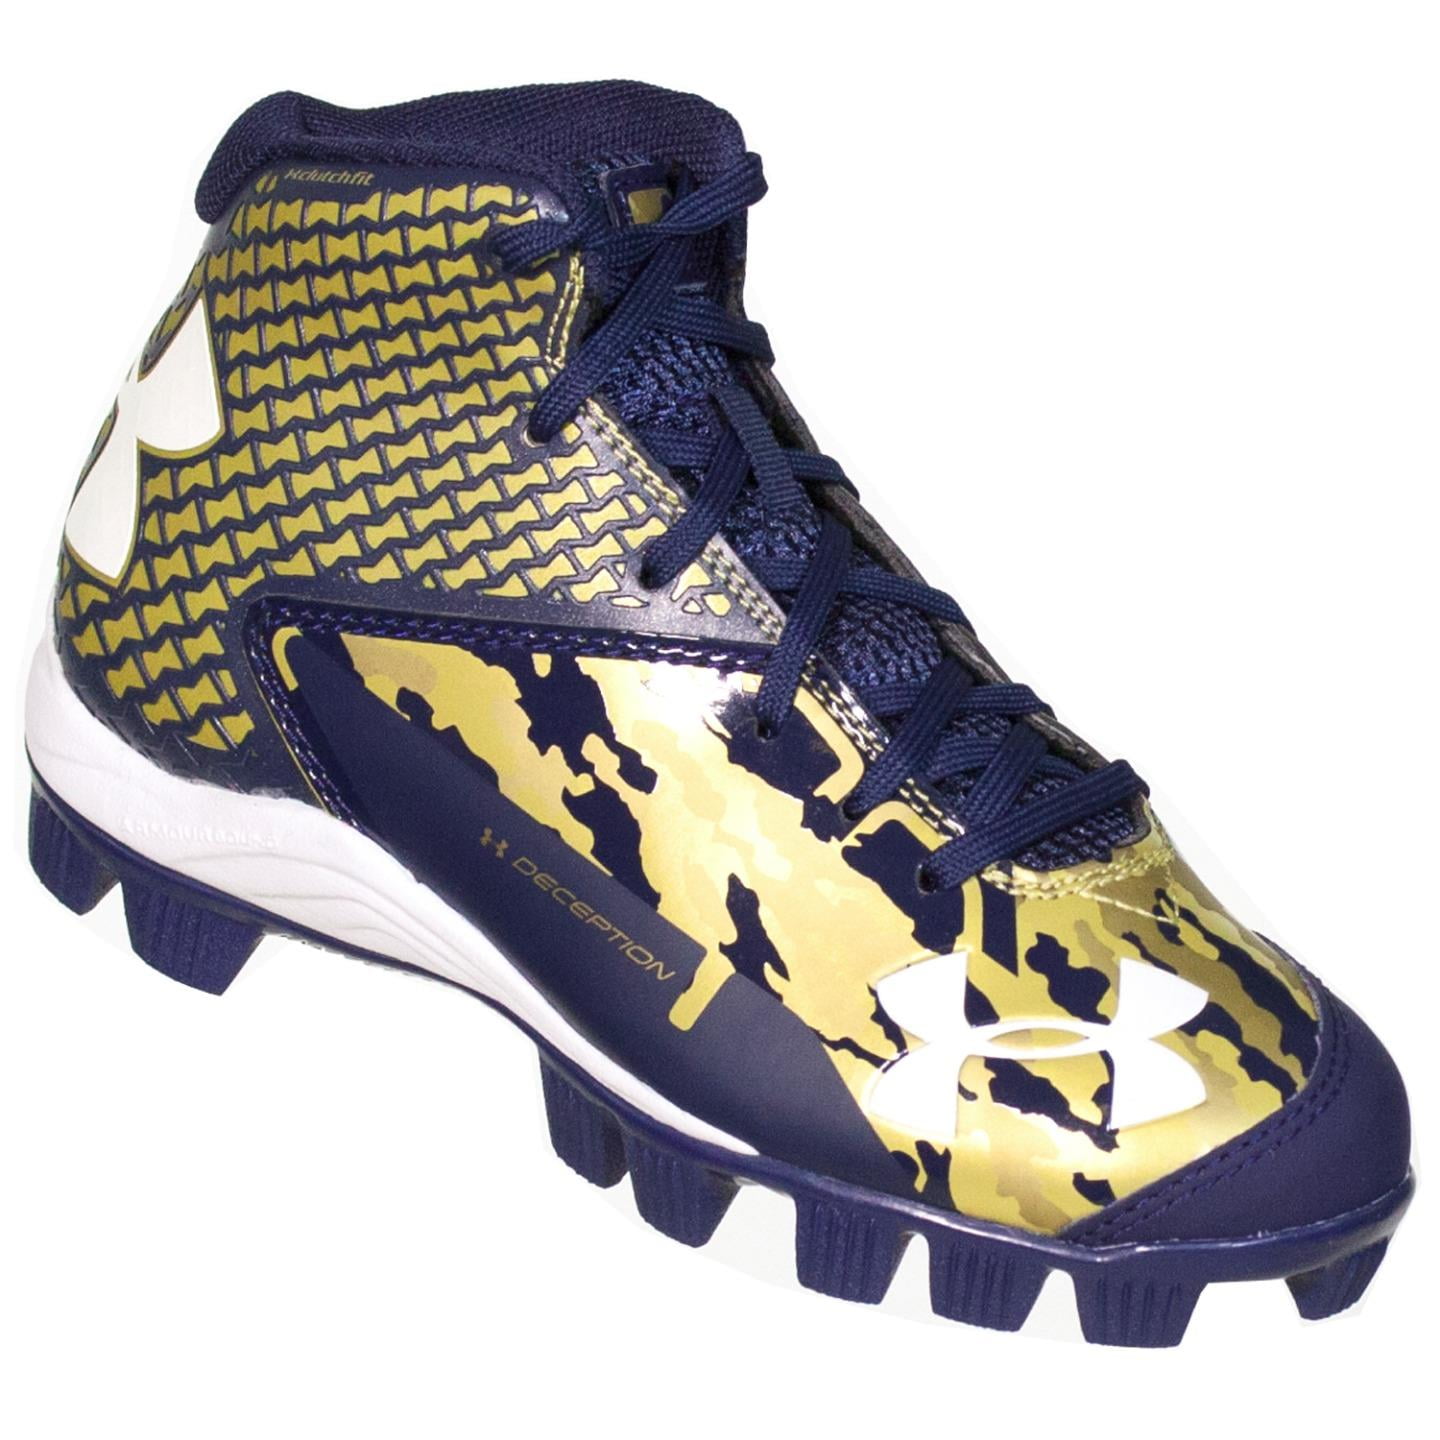 black and gold youth baseball cleats